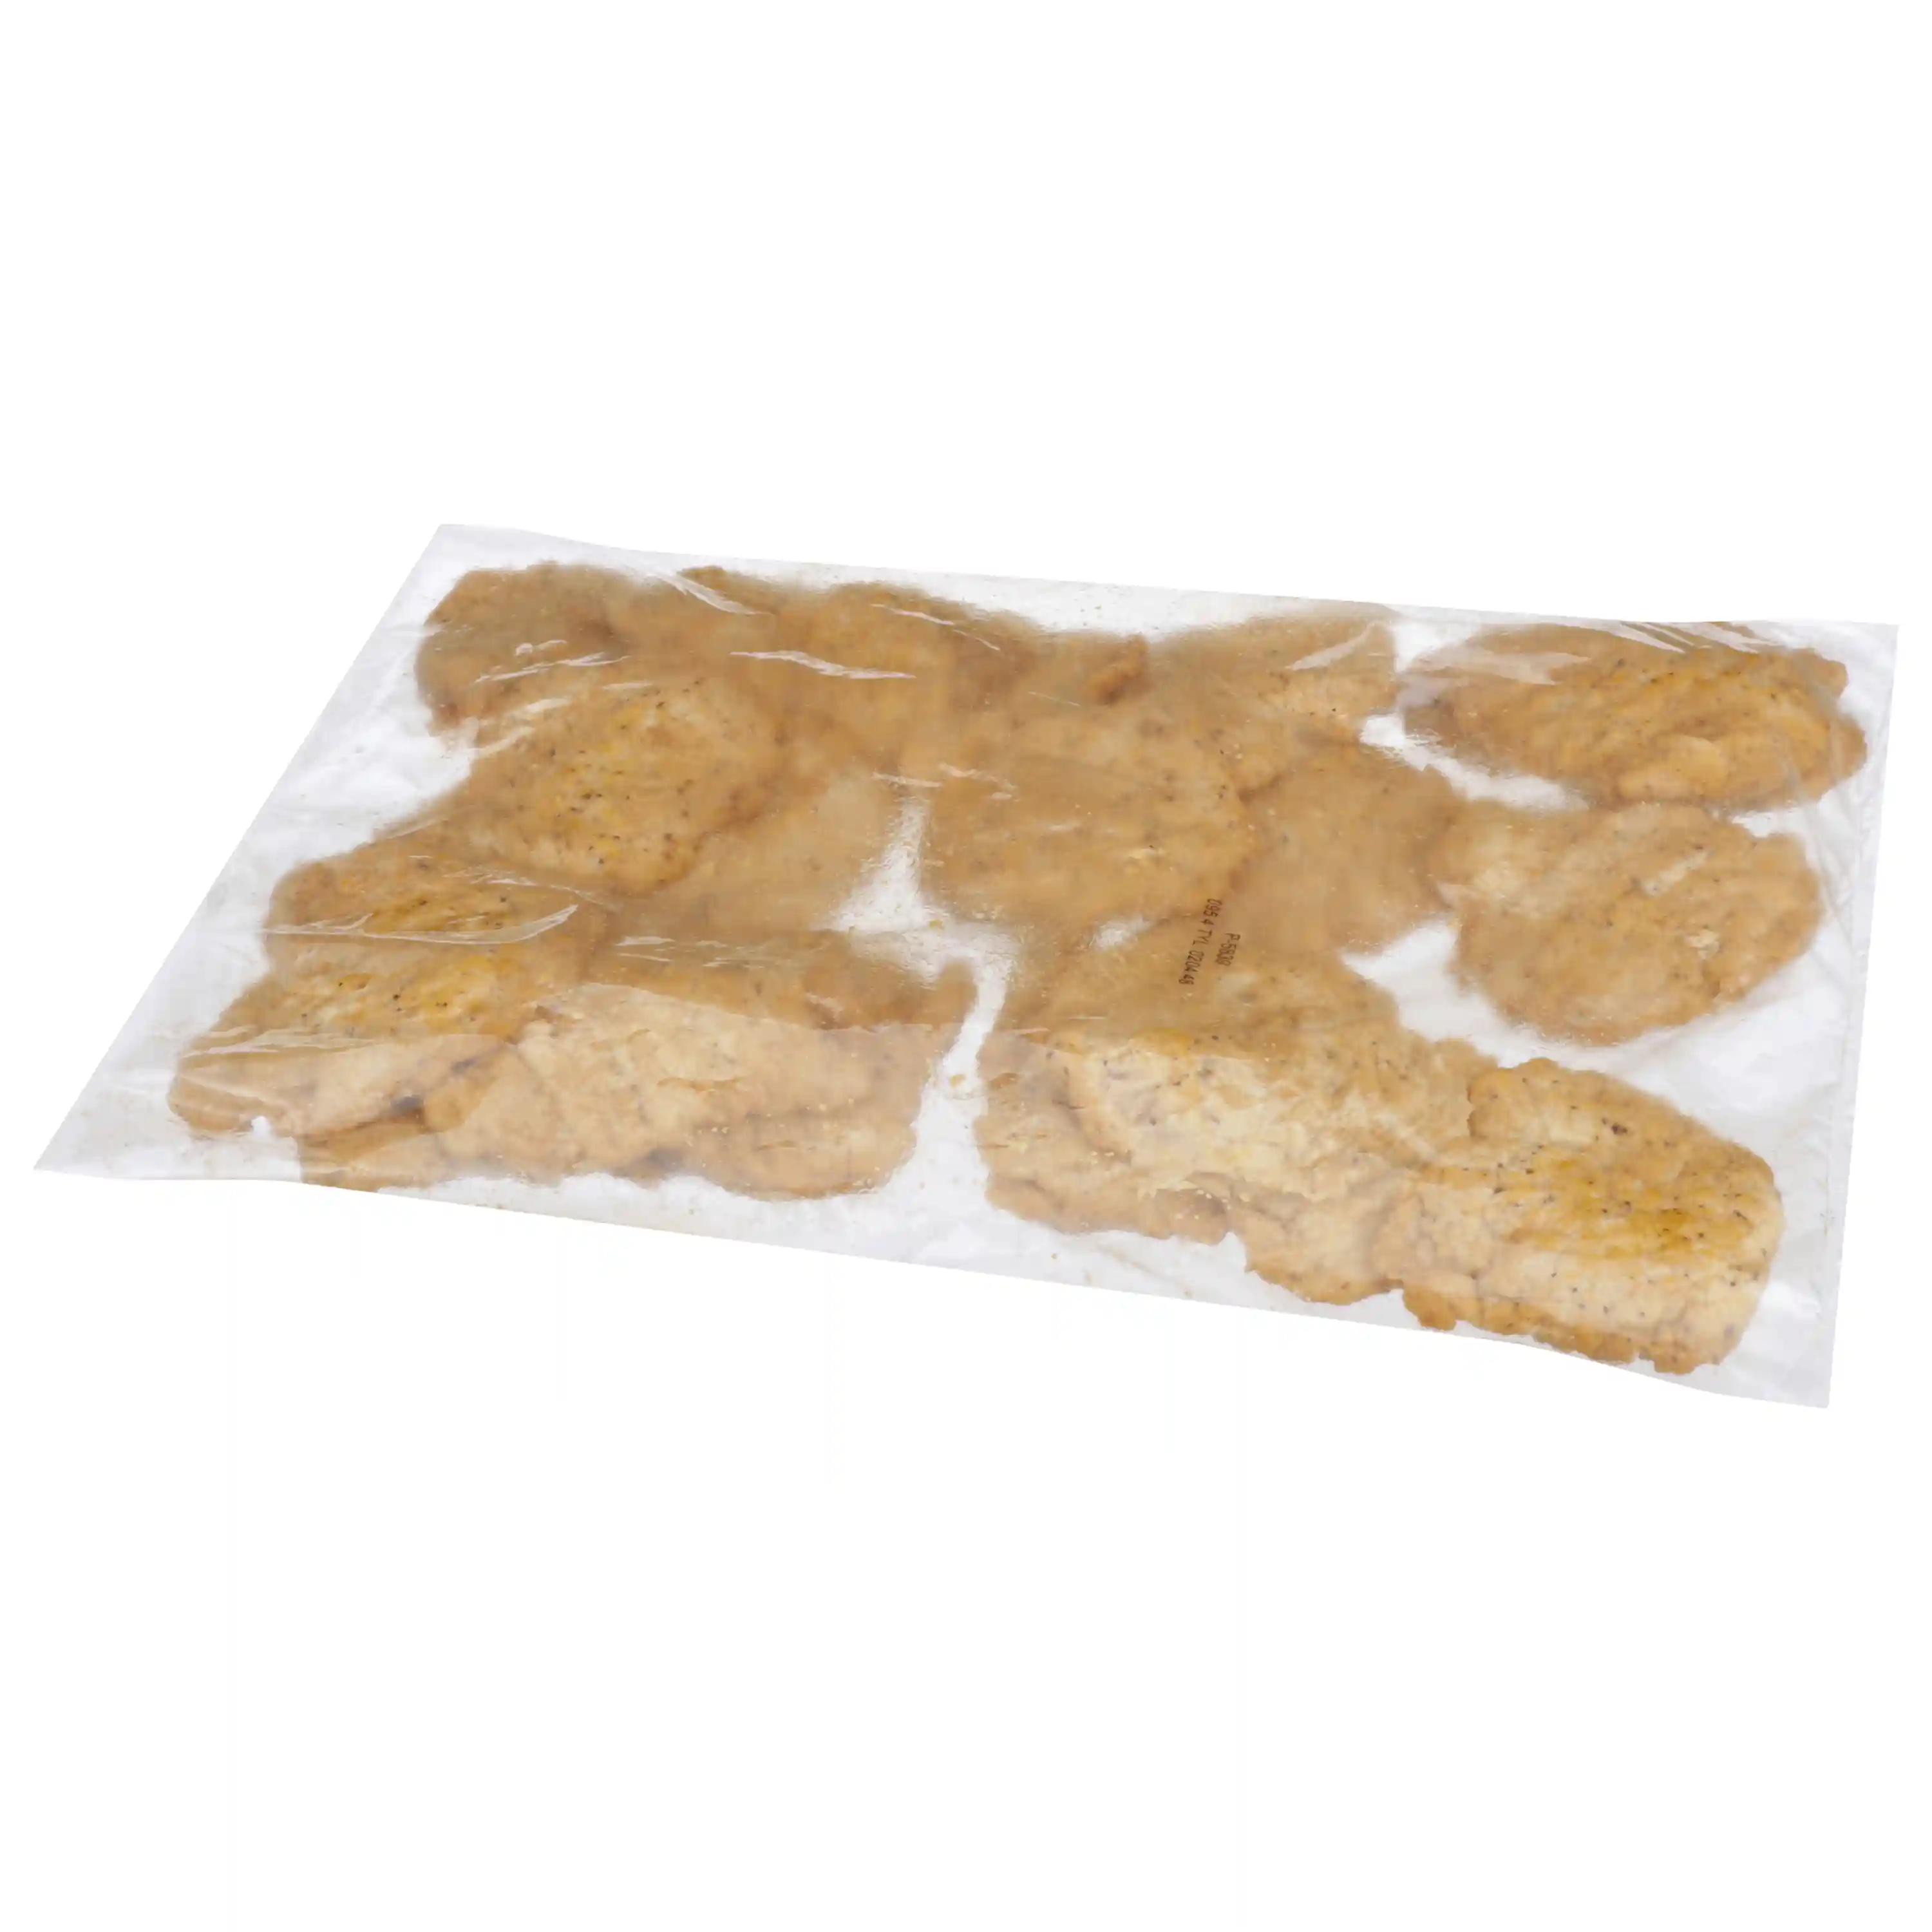 Tyson® Uncooked Breaded Hot & Spicy Chicken Breast Filets, 4 oz._image_21